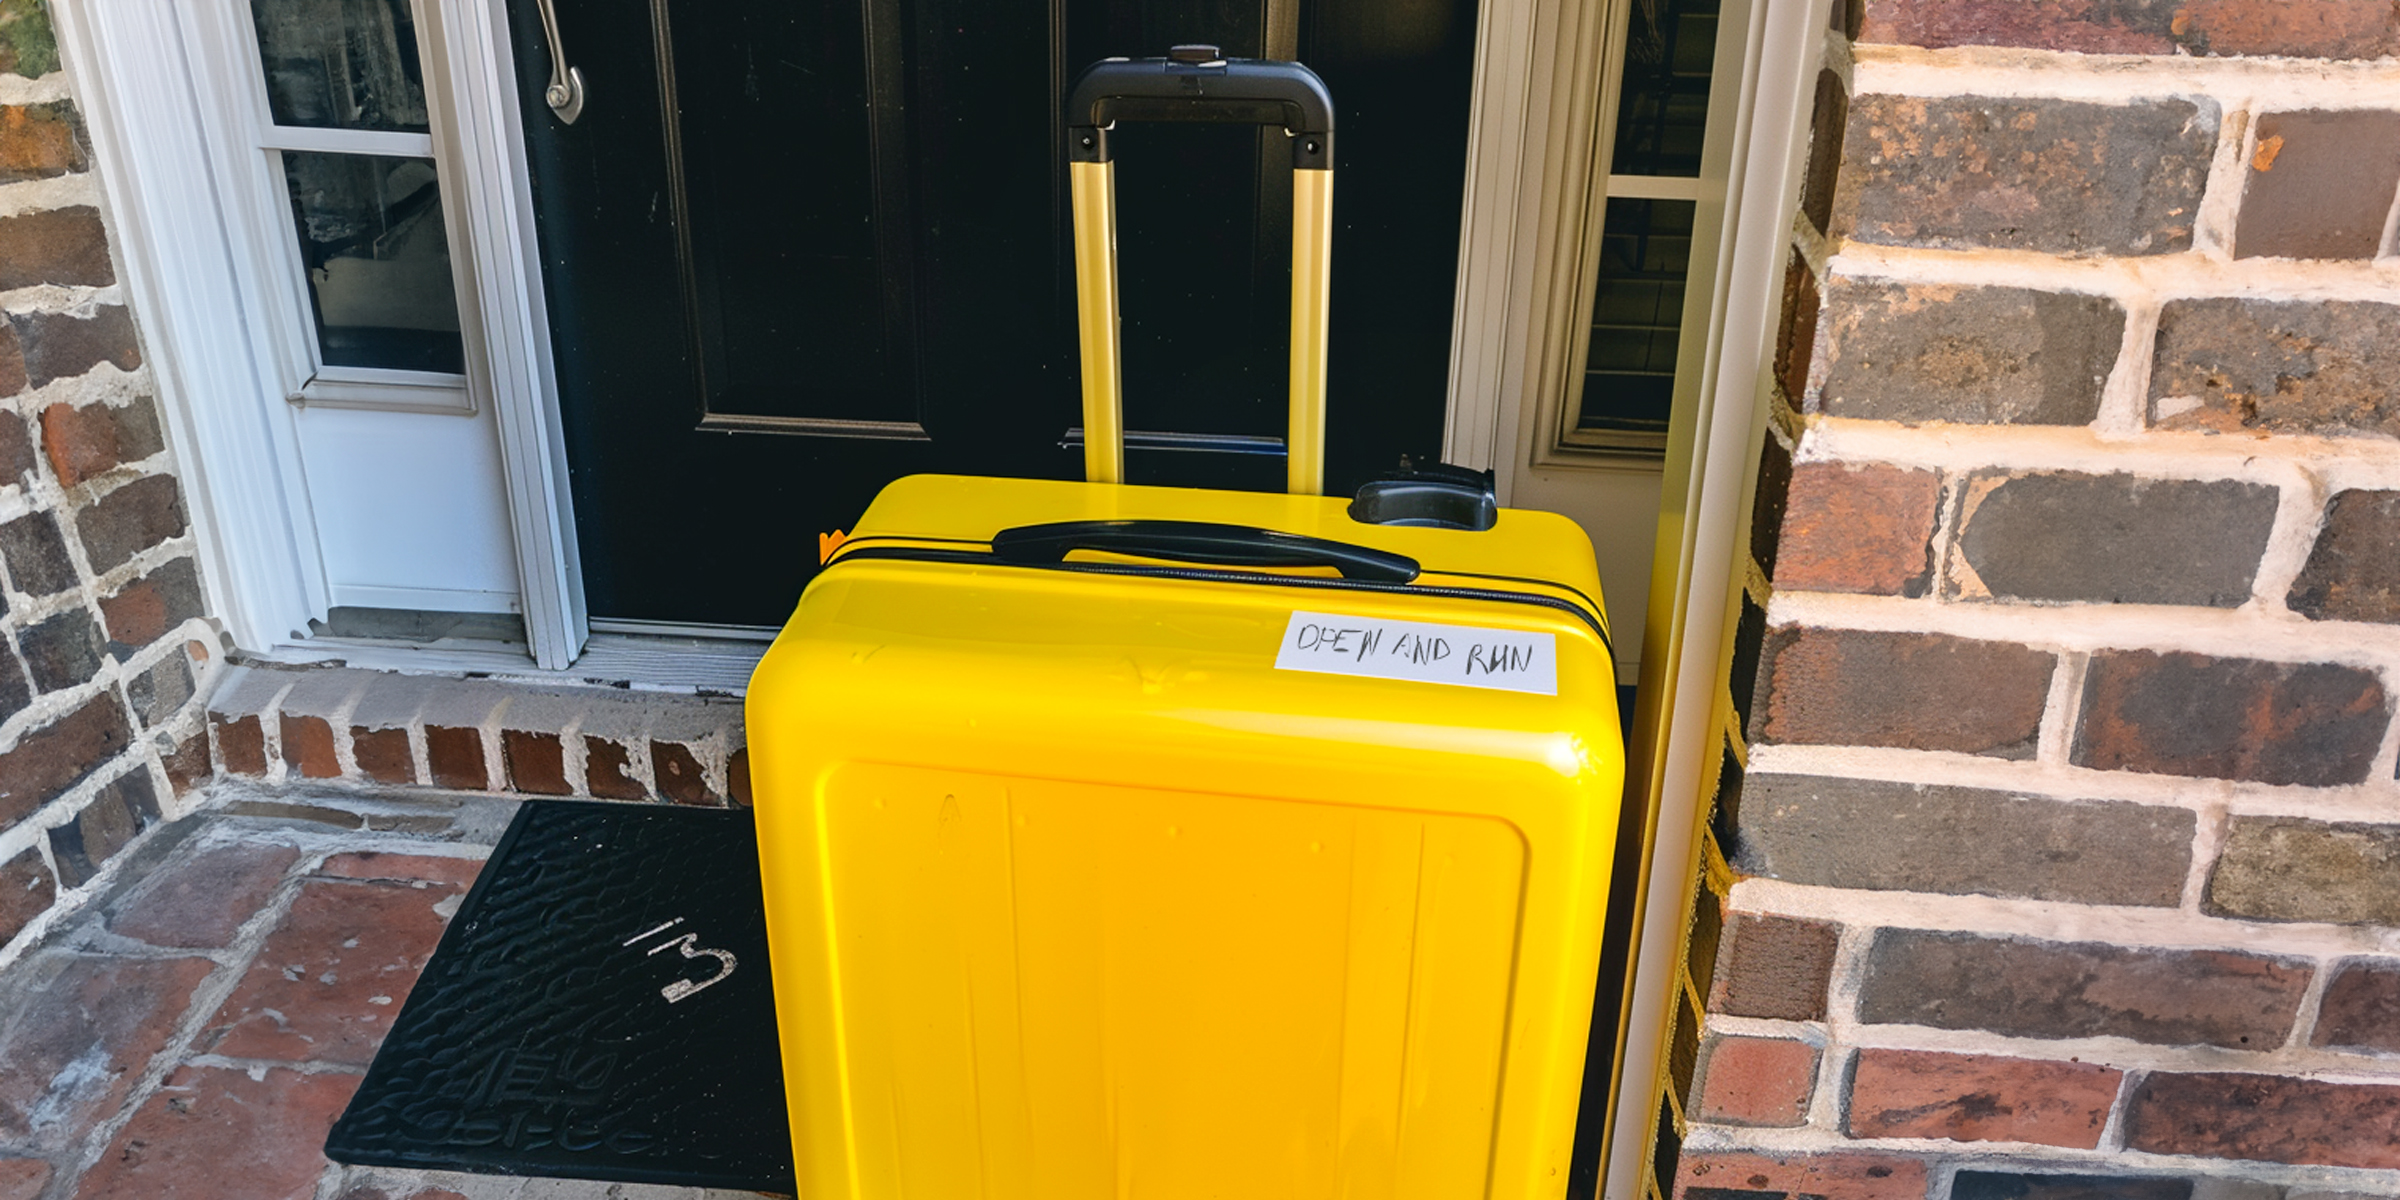 A yellow suitcase with a note | Source: Amomama